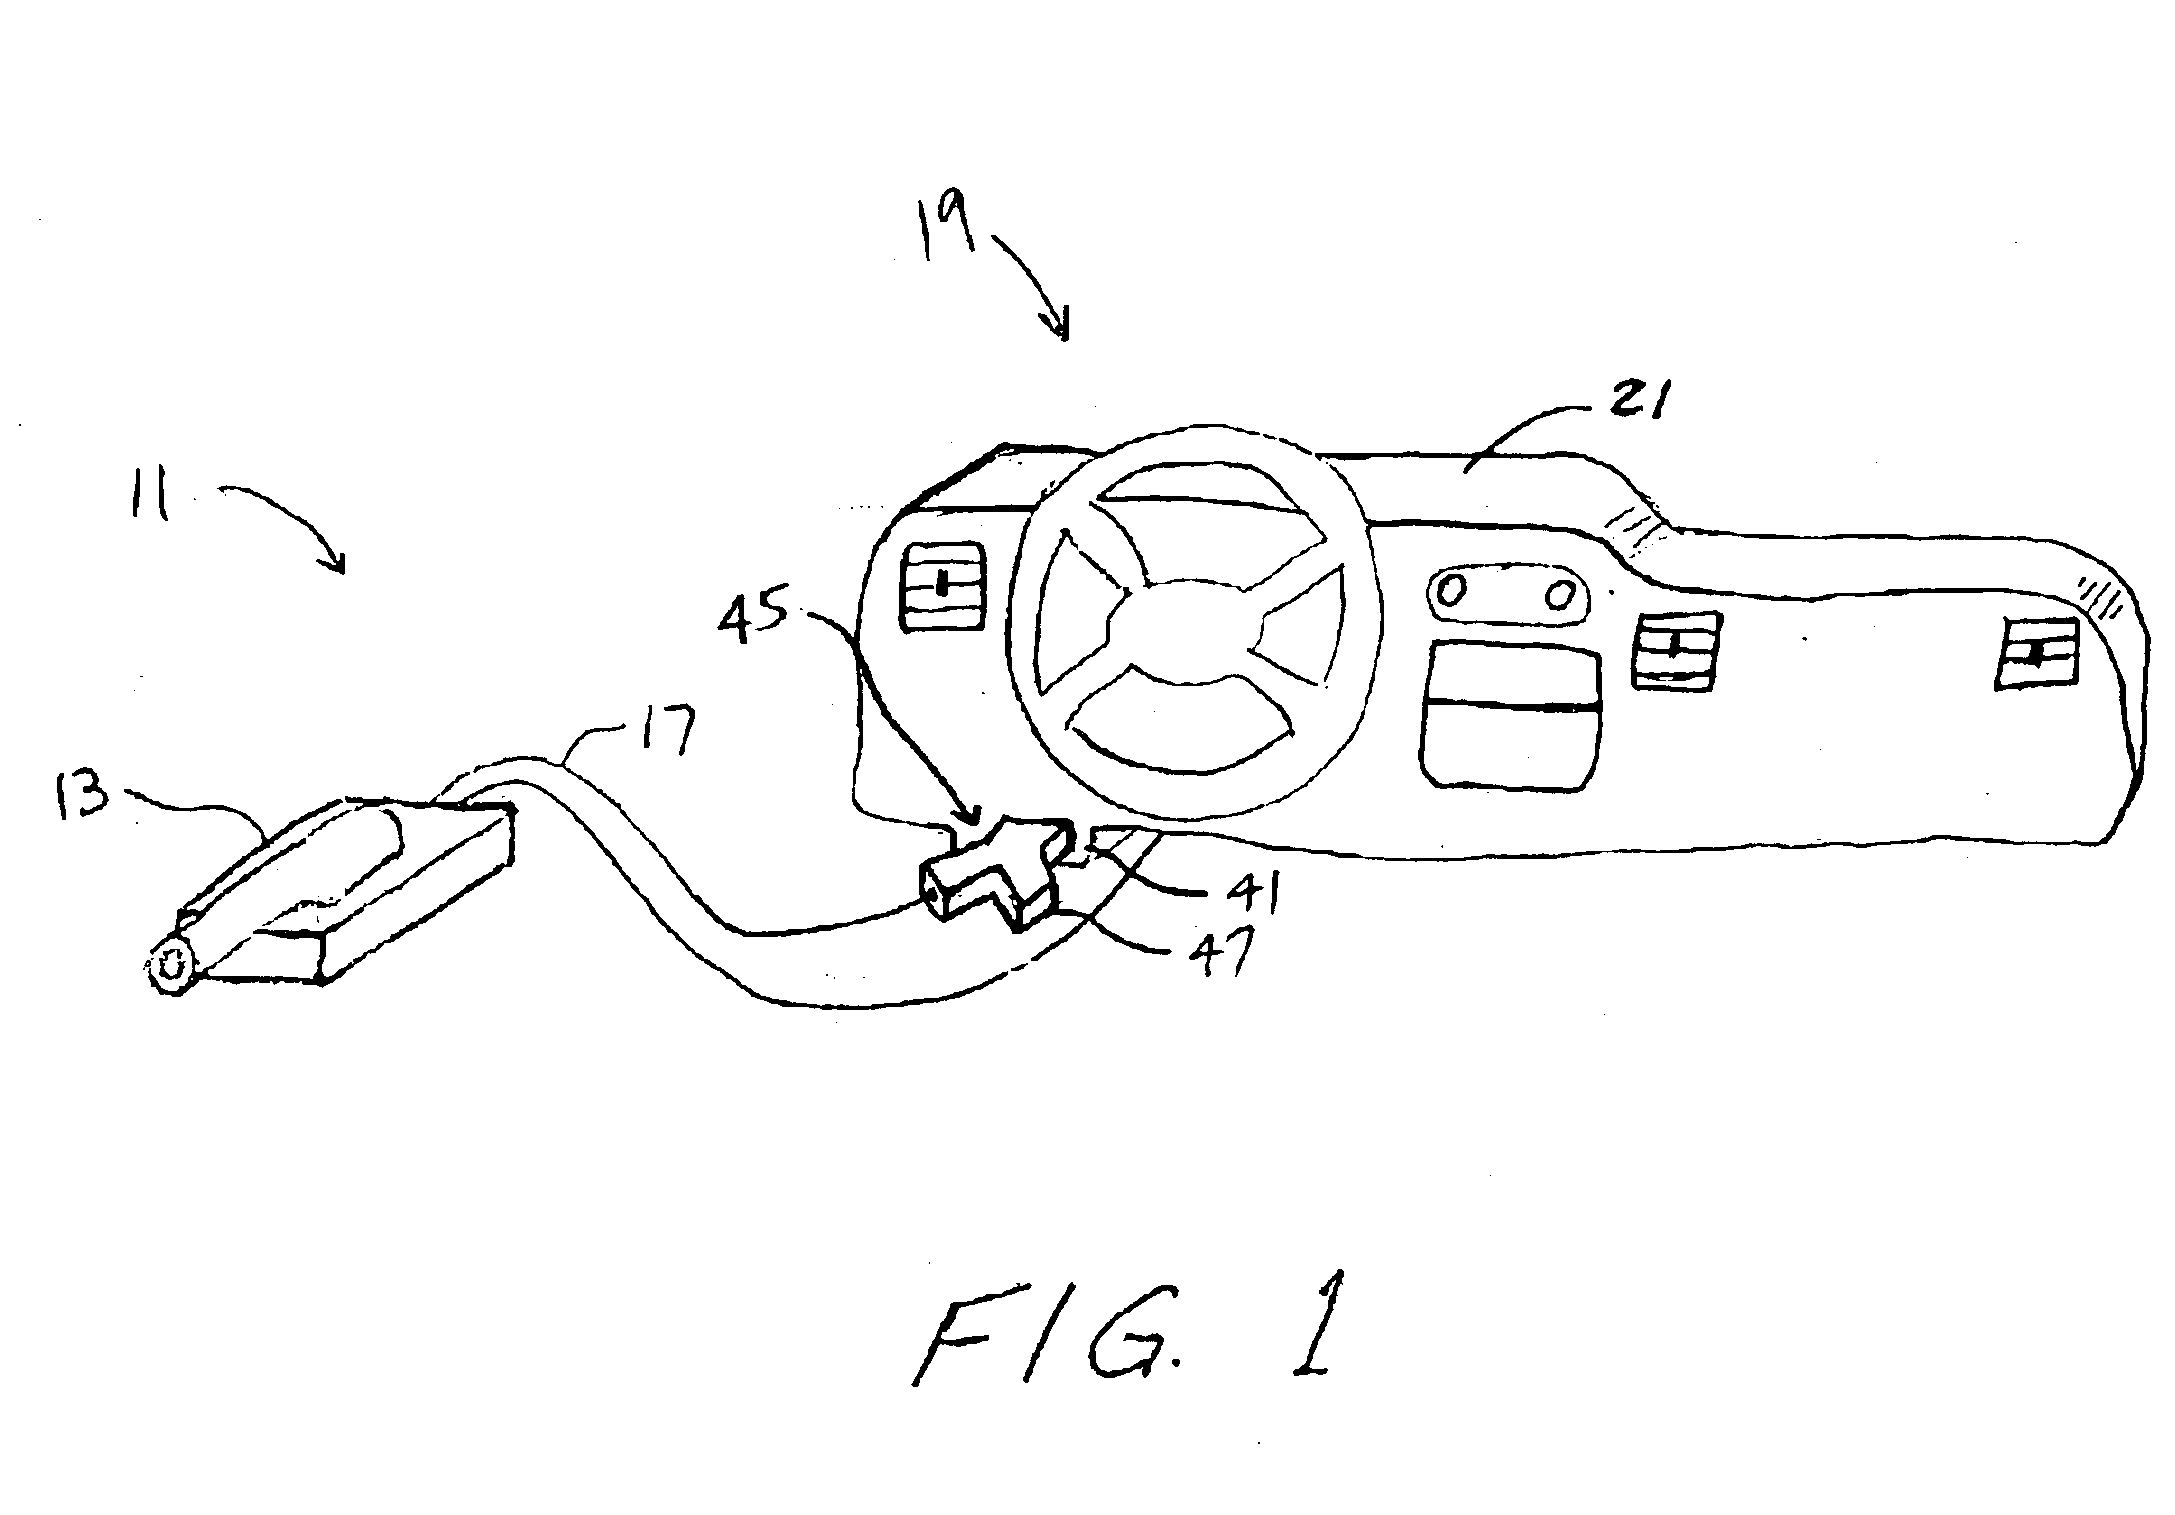 Sobriety testing apparatus having OBD-II connection capability